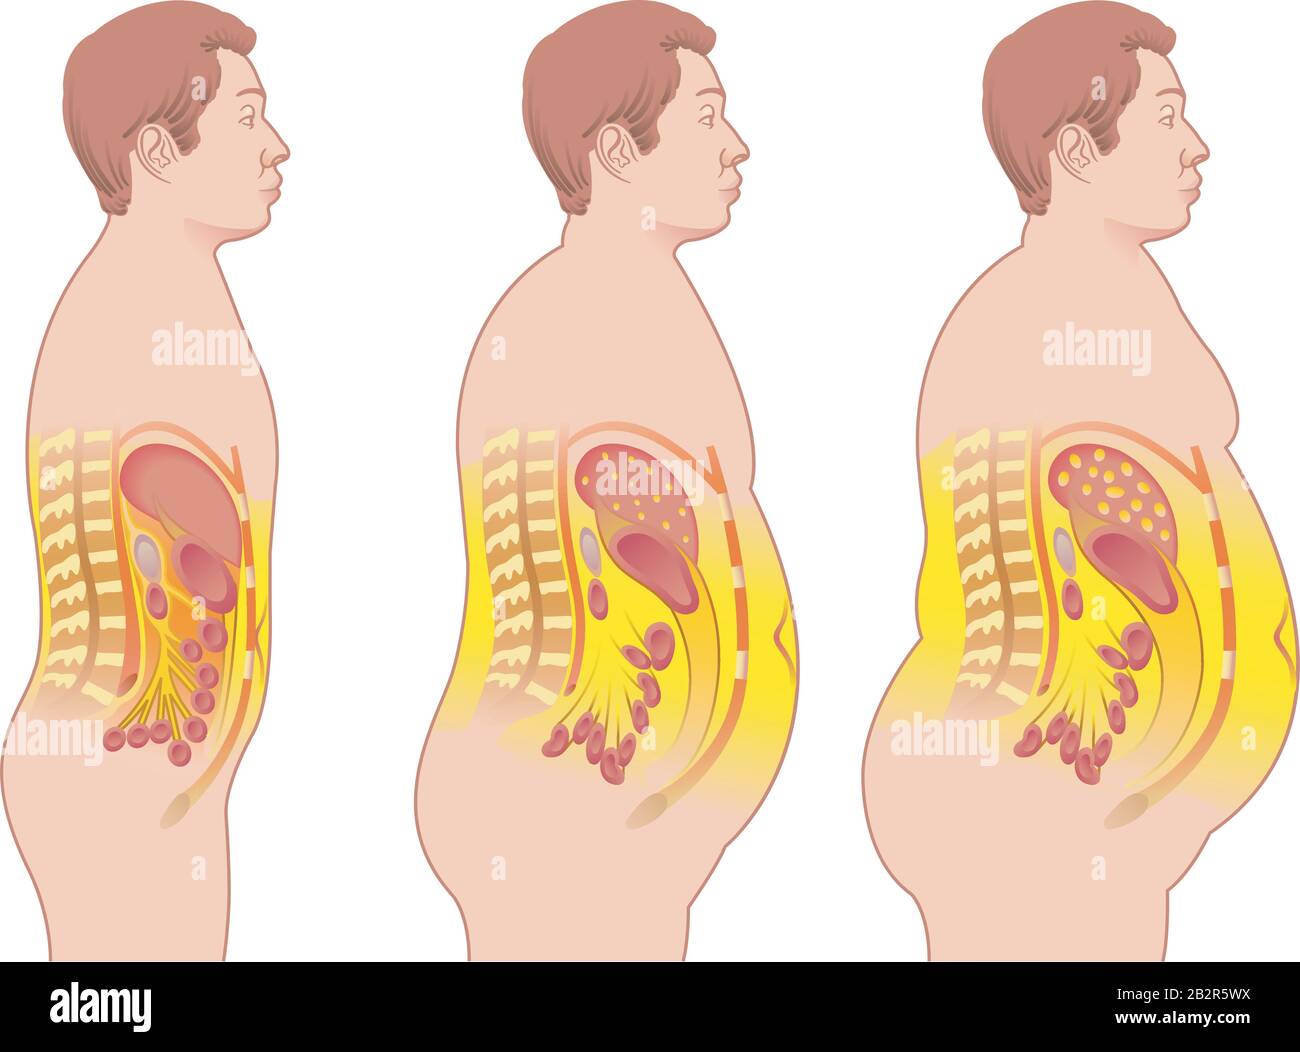 Medical illustration of the consequences of obesity. Stock Vector